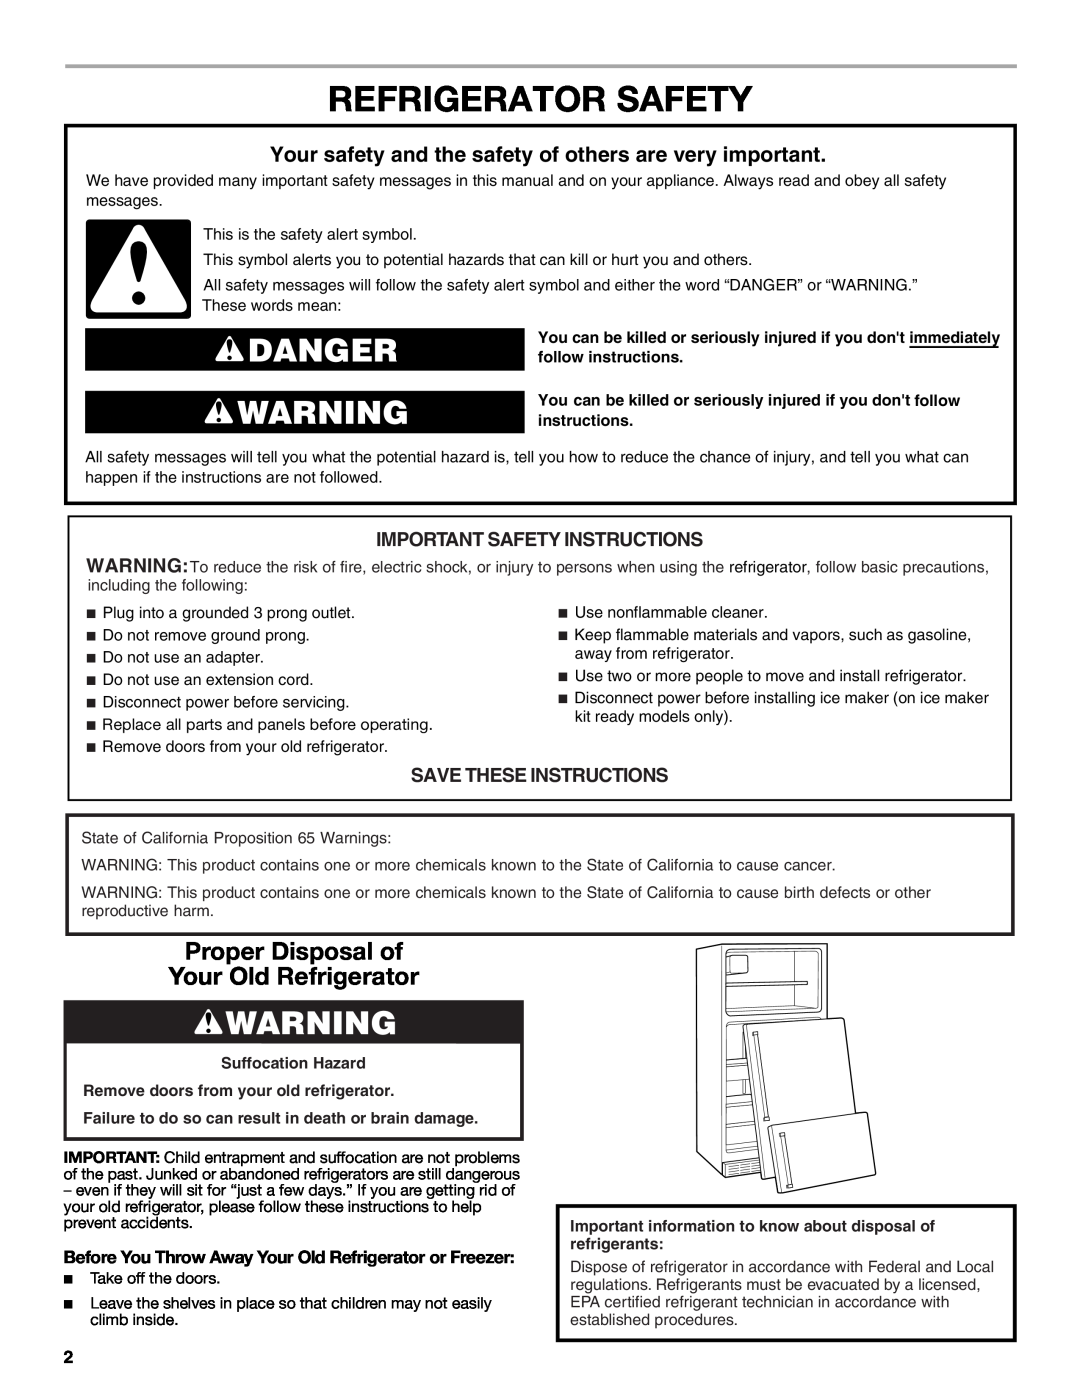 Whirlpool W10475403A Refrigerator Safety, Proper Disposal of Your Old Refrigerator, Important Safety Instructions, Danger 